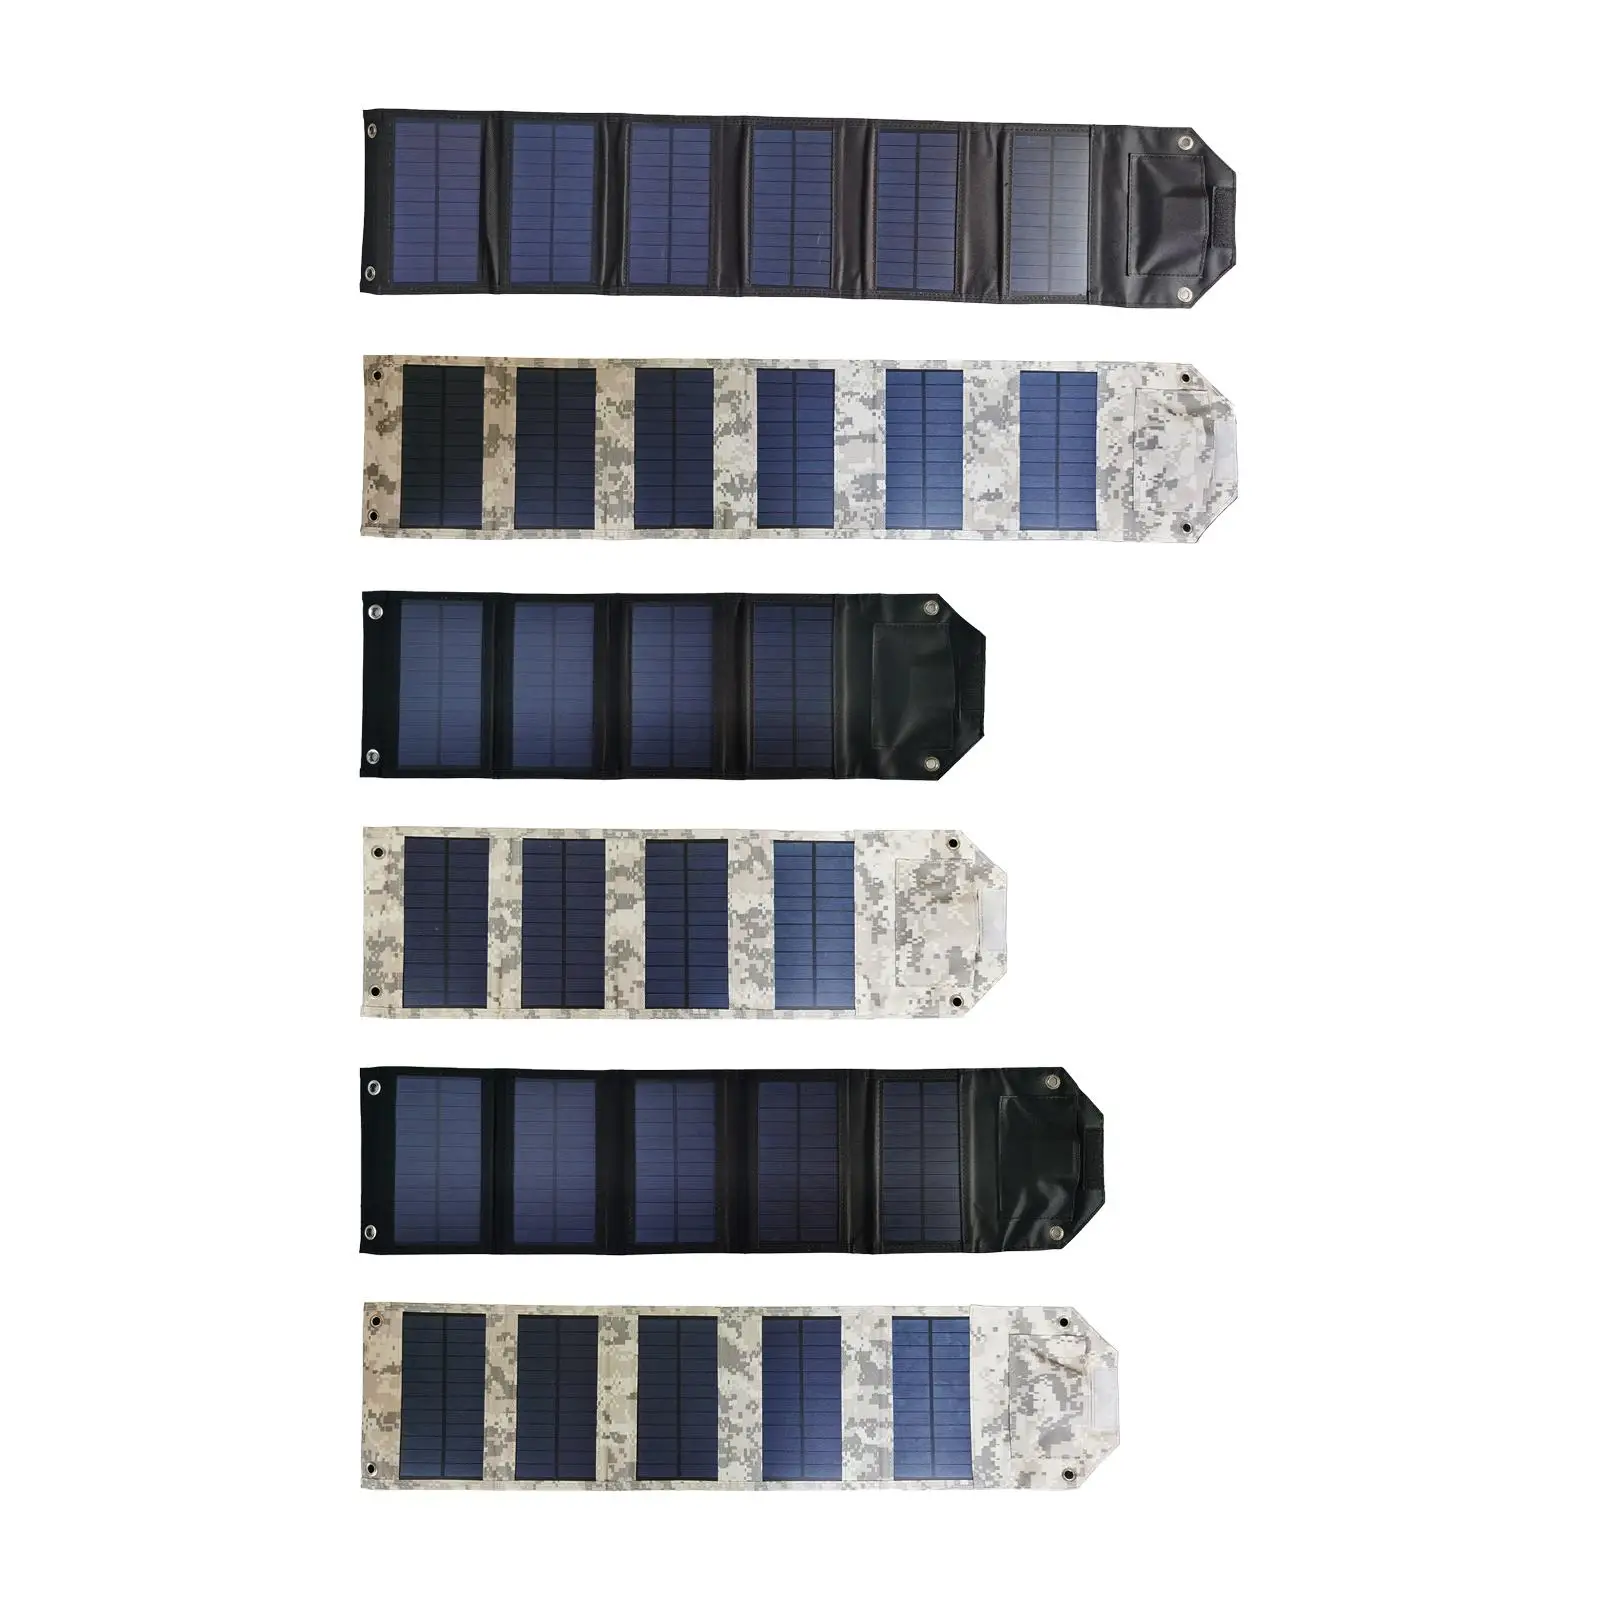 

Solar Panel Kits Trip Home Portable Folding Solar Panel Charger 5V USB Output for Phone Camping Cellphone Laptop Solar Generator